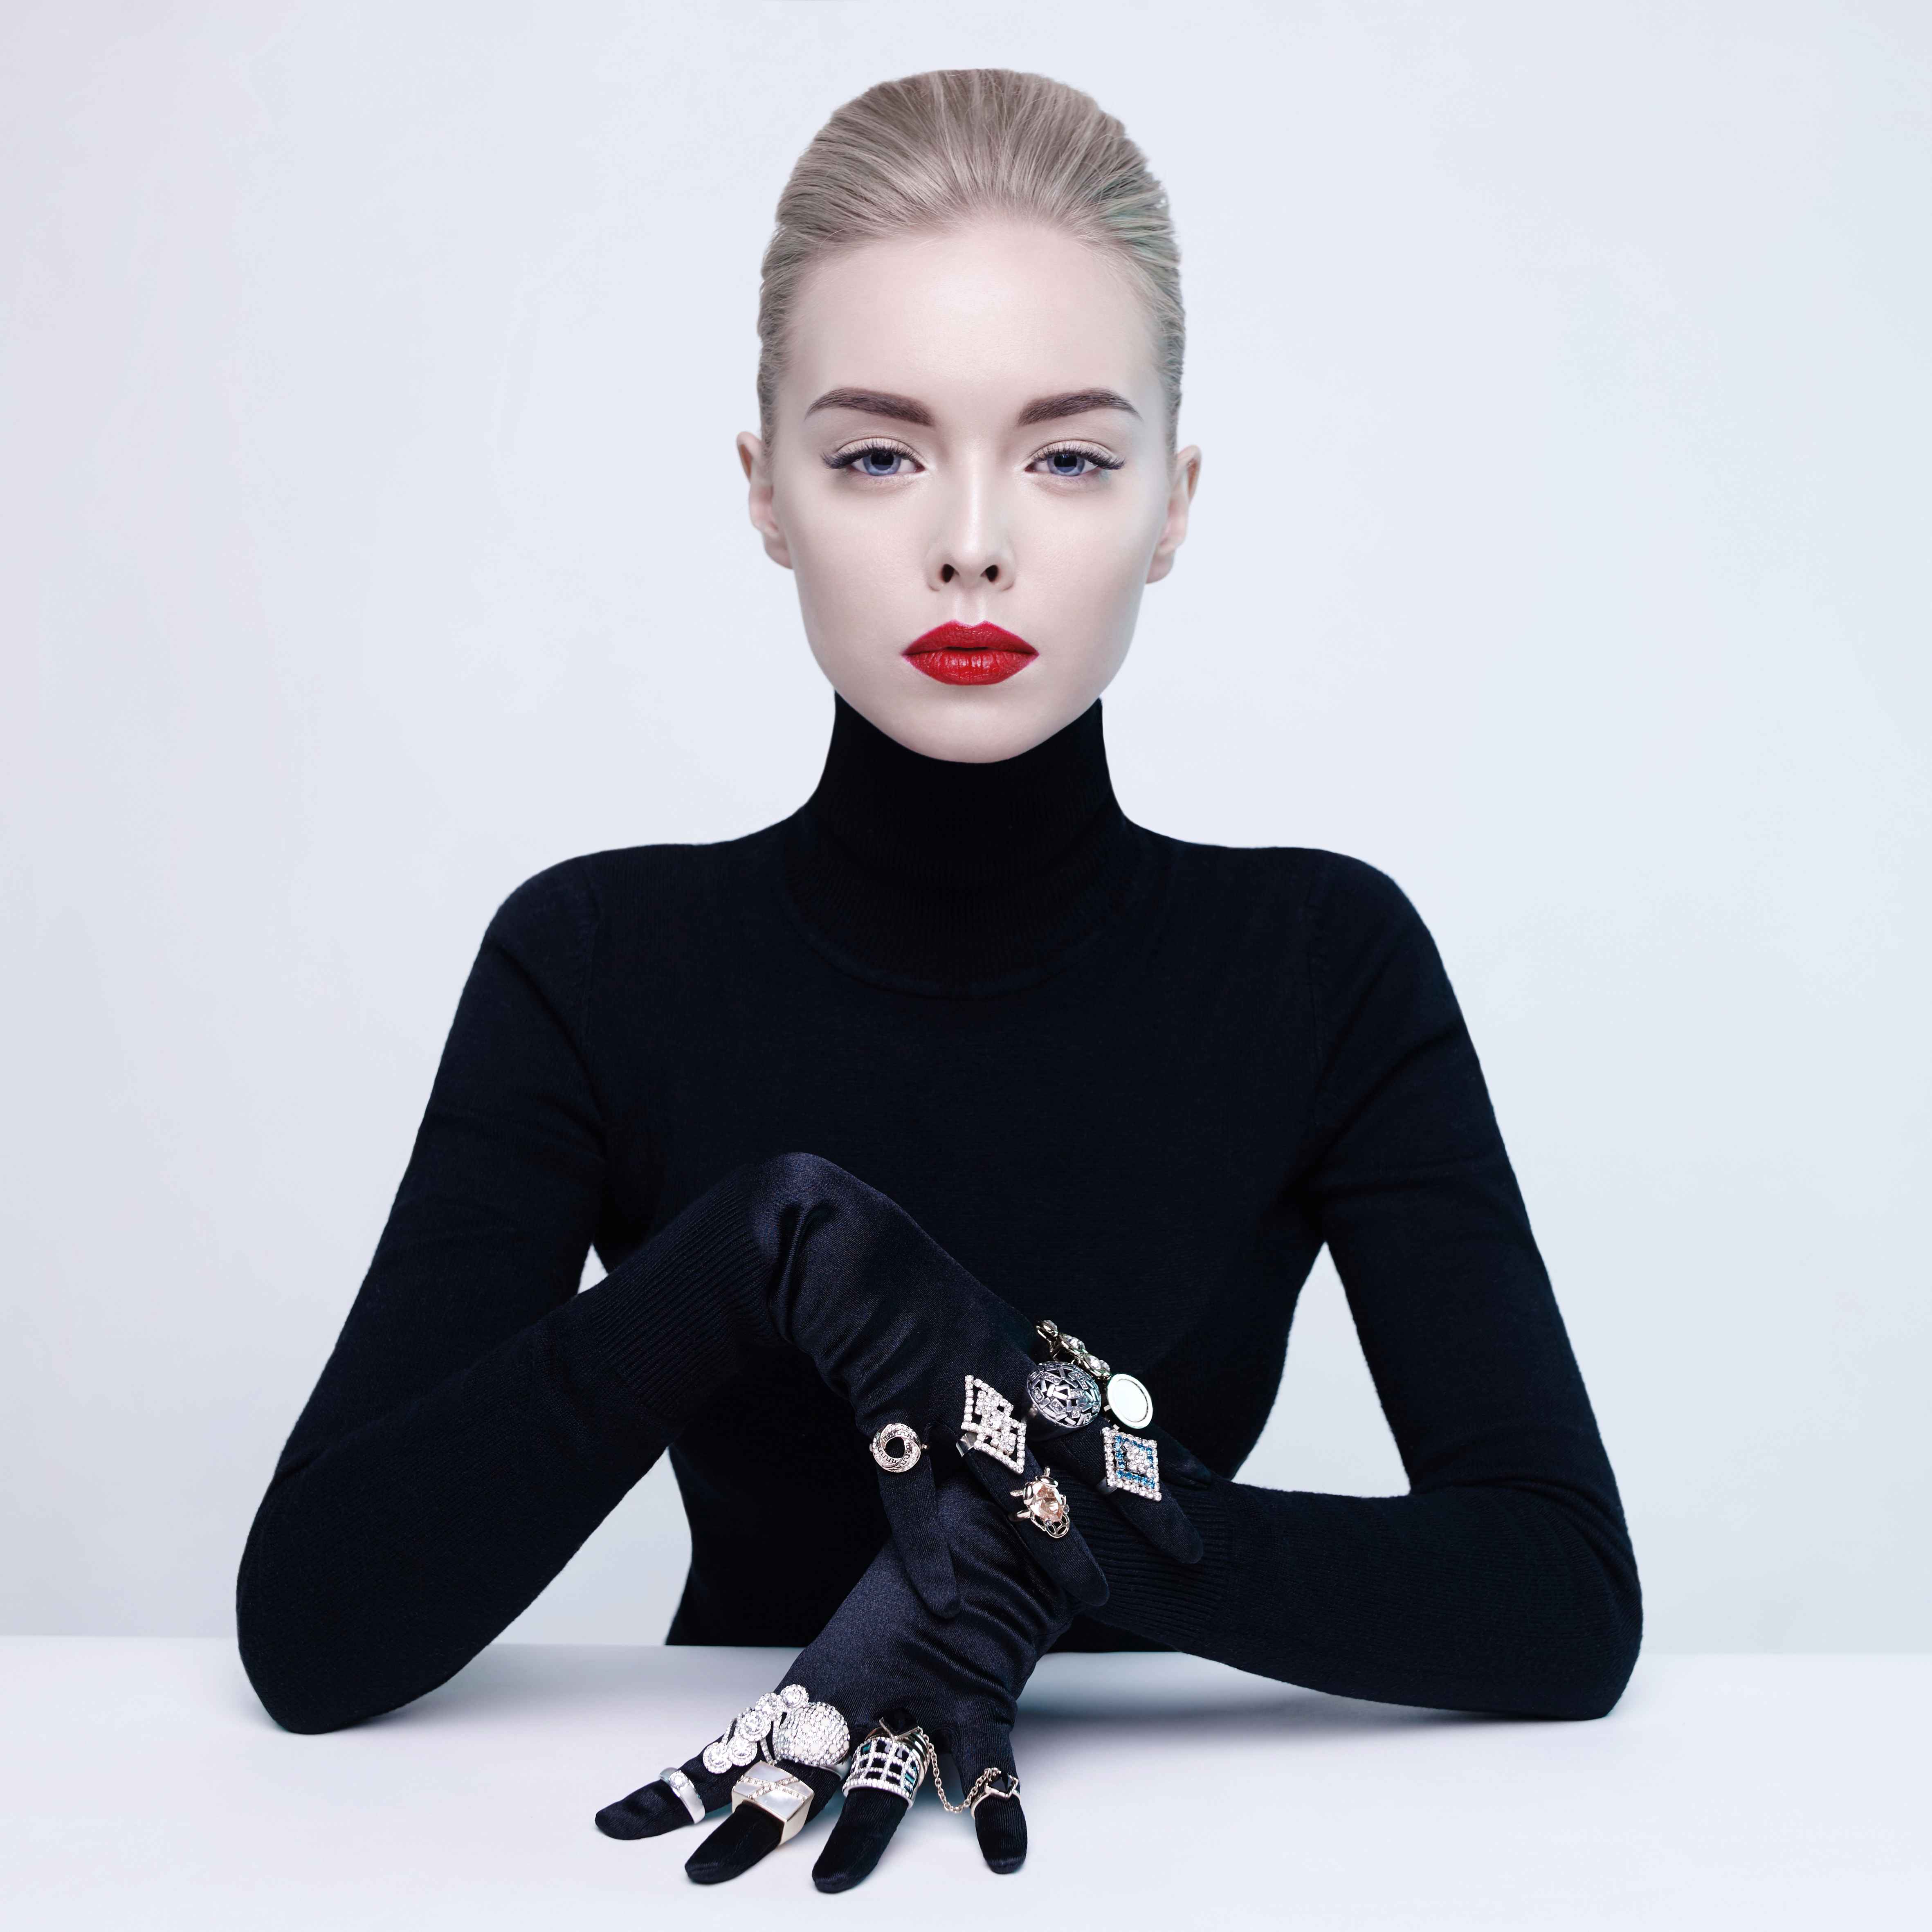 People 4724x4724 fashion jewelry shiny women rings lipstick eyes luxury makeup blonde face silver studio table black white gloves portrait Wealth gold Vogue magazine portrait display simple background